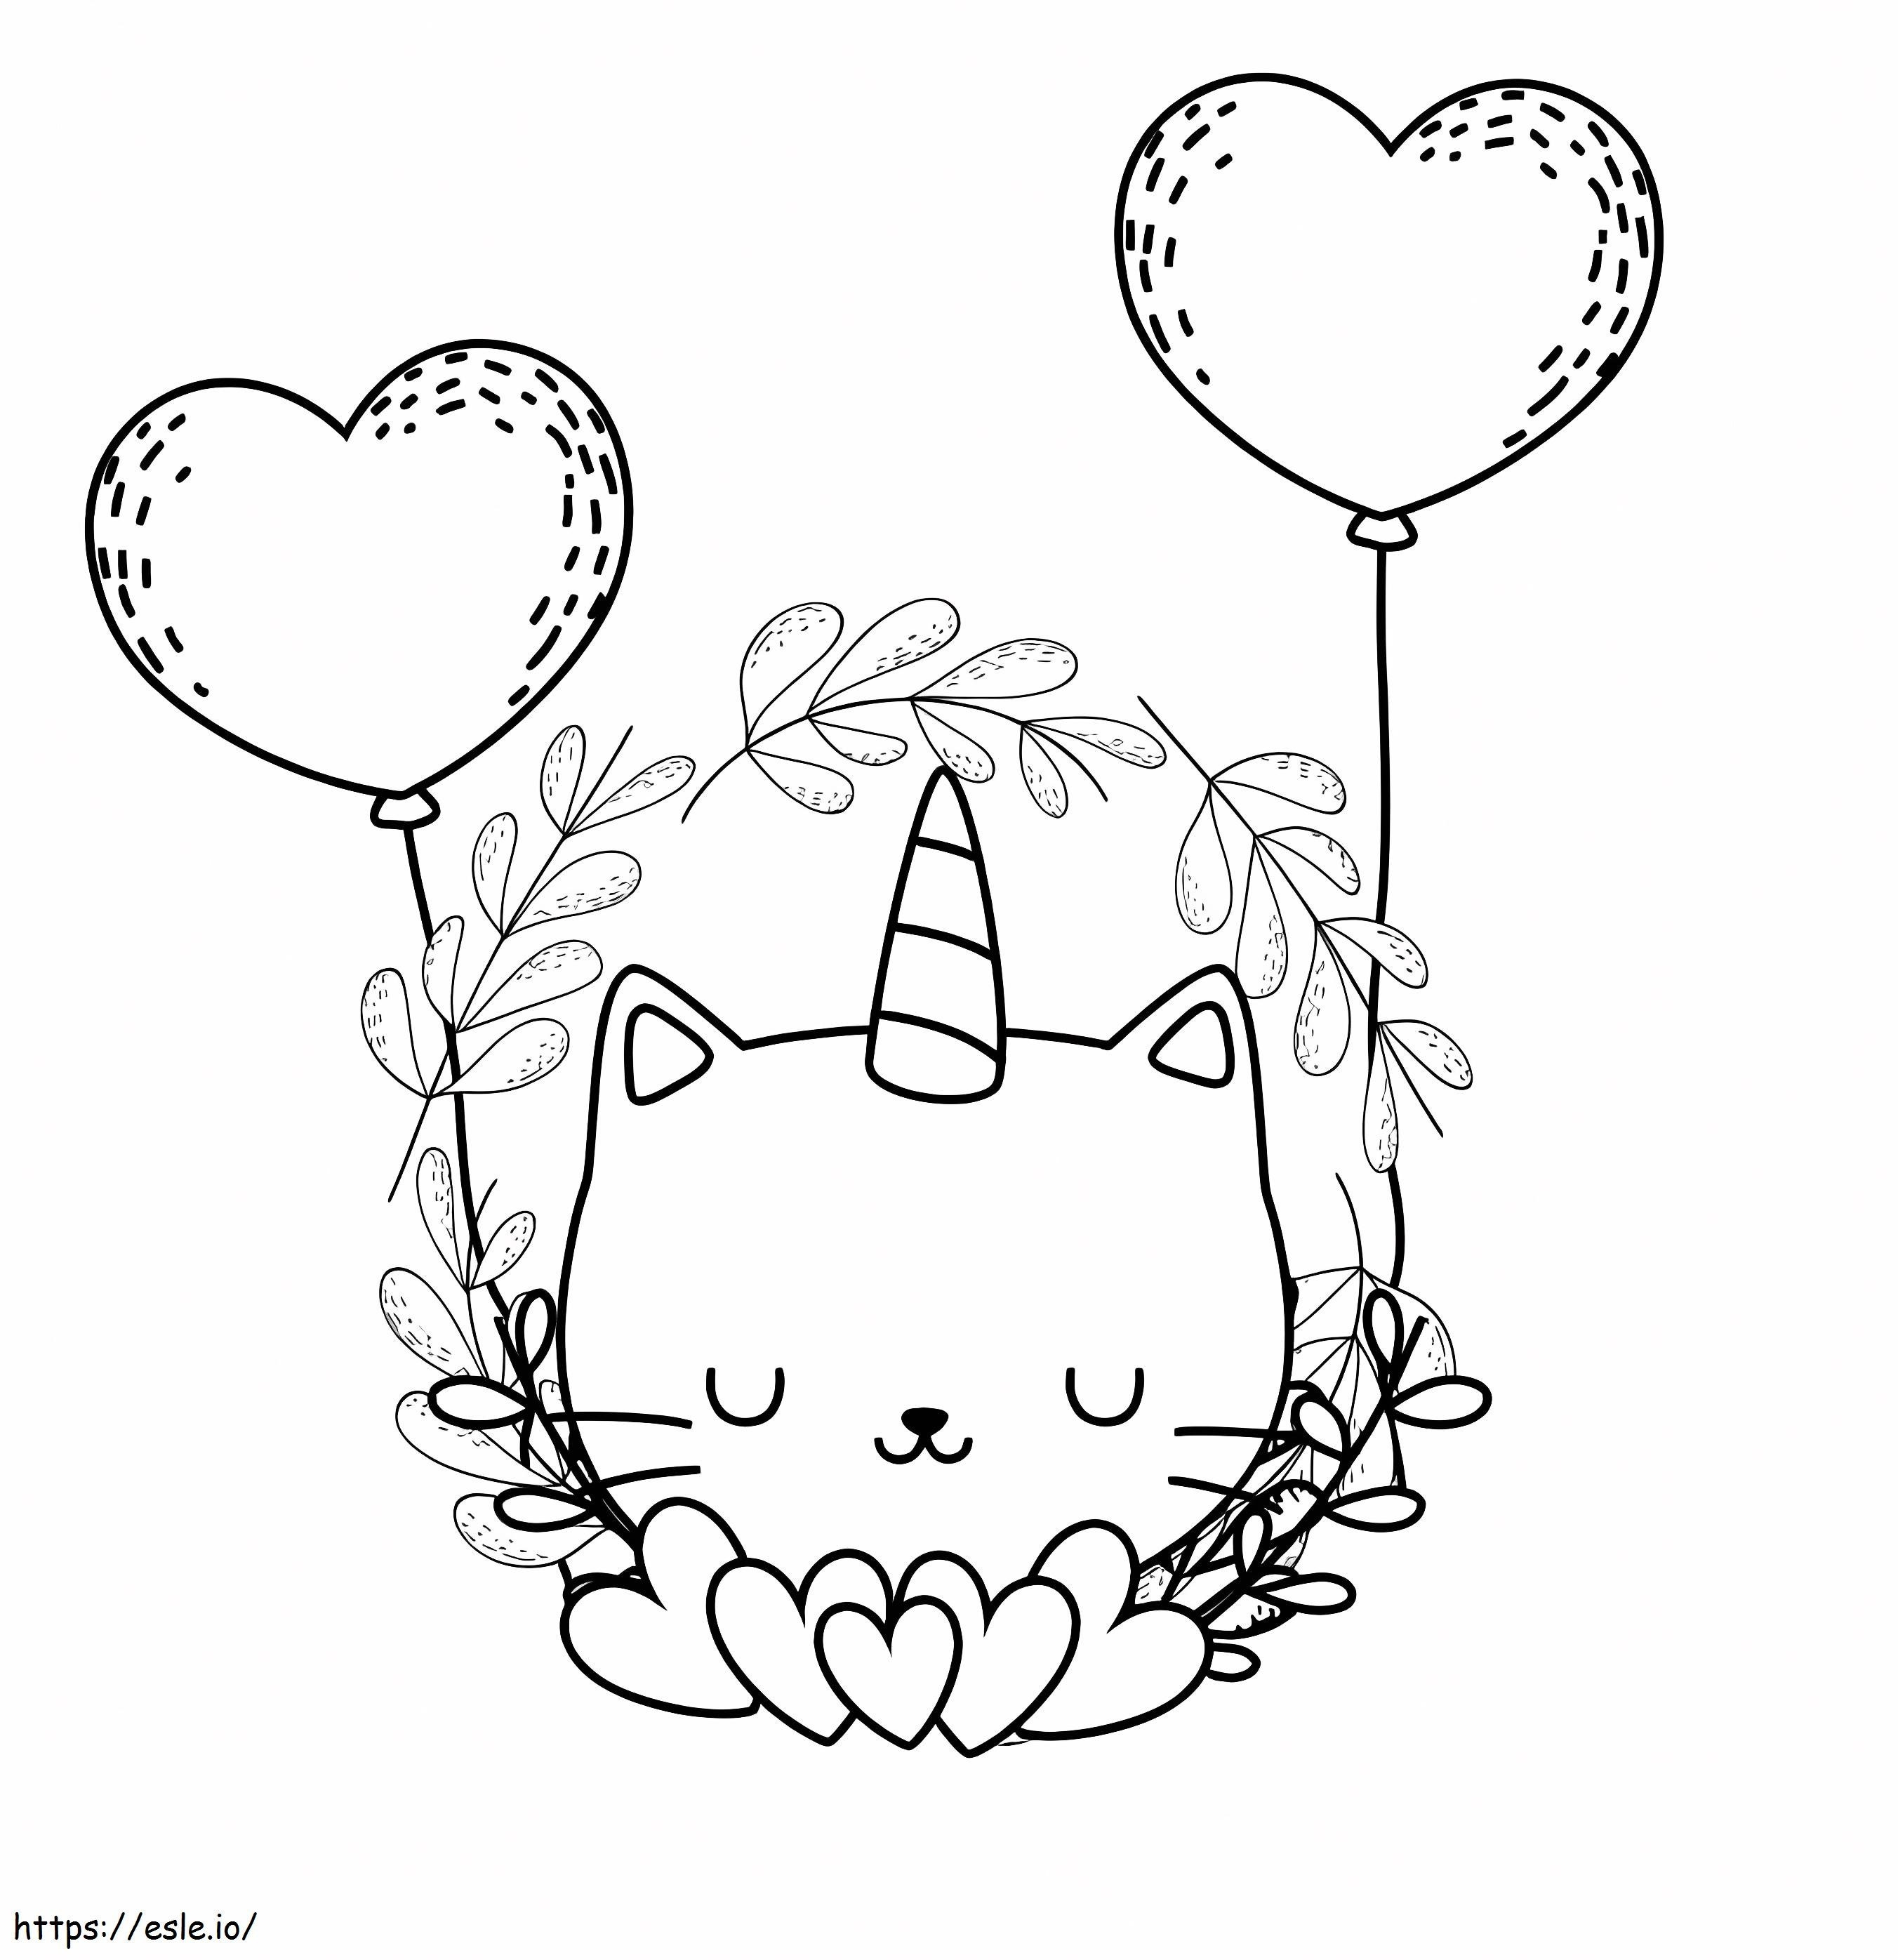 Unicorn Cat And Heart Balloons coloring page